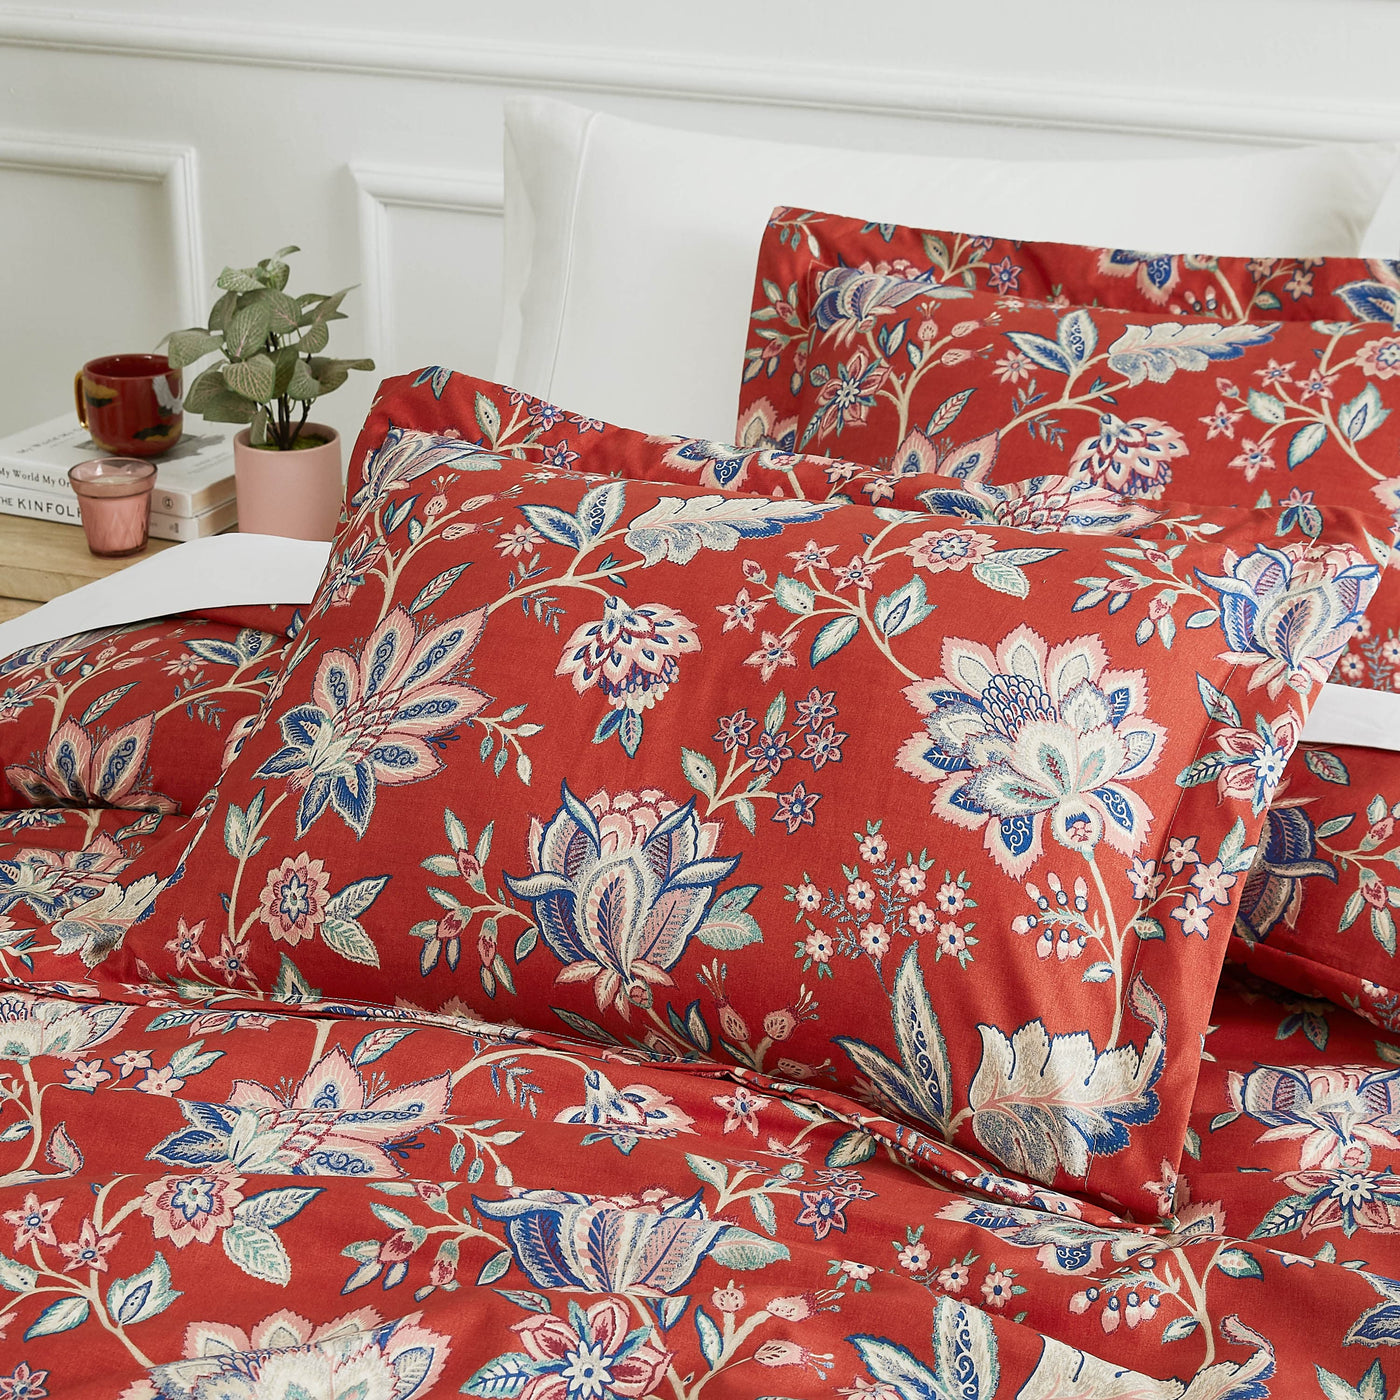 Details and Prints of Jacobean Willow Duvet Cover Set in Red #color_jacobean-willow-red